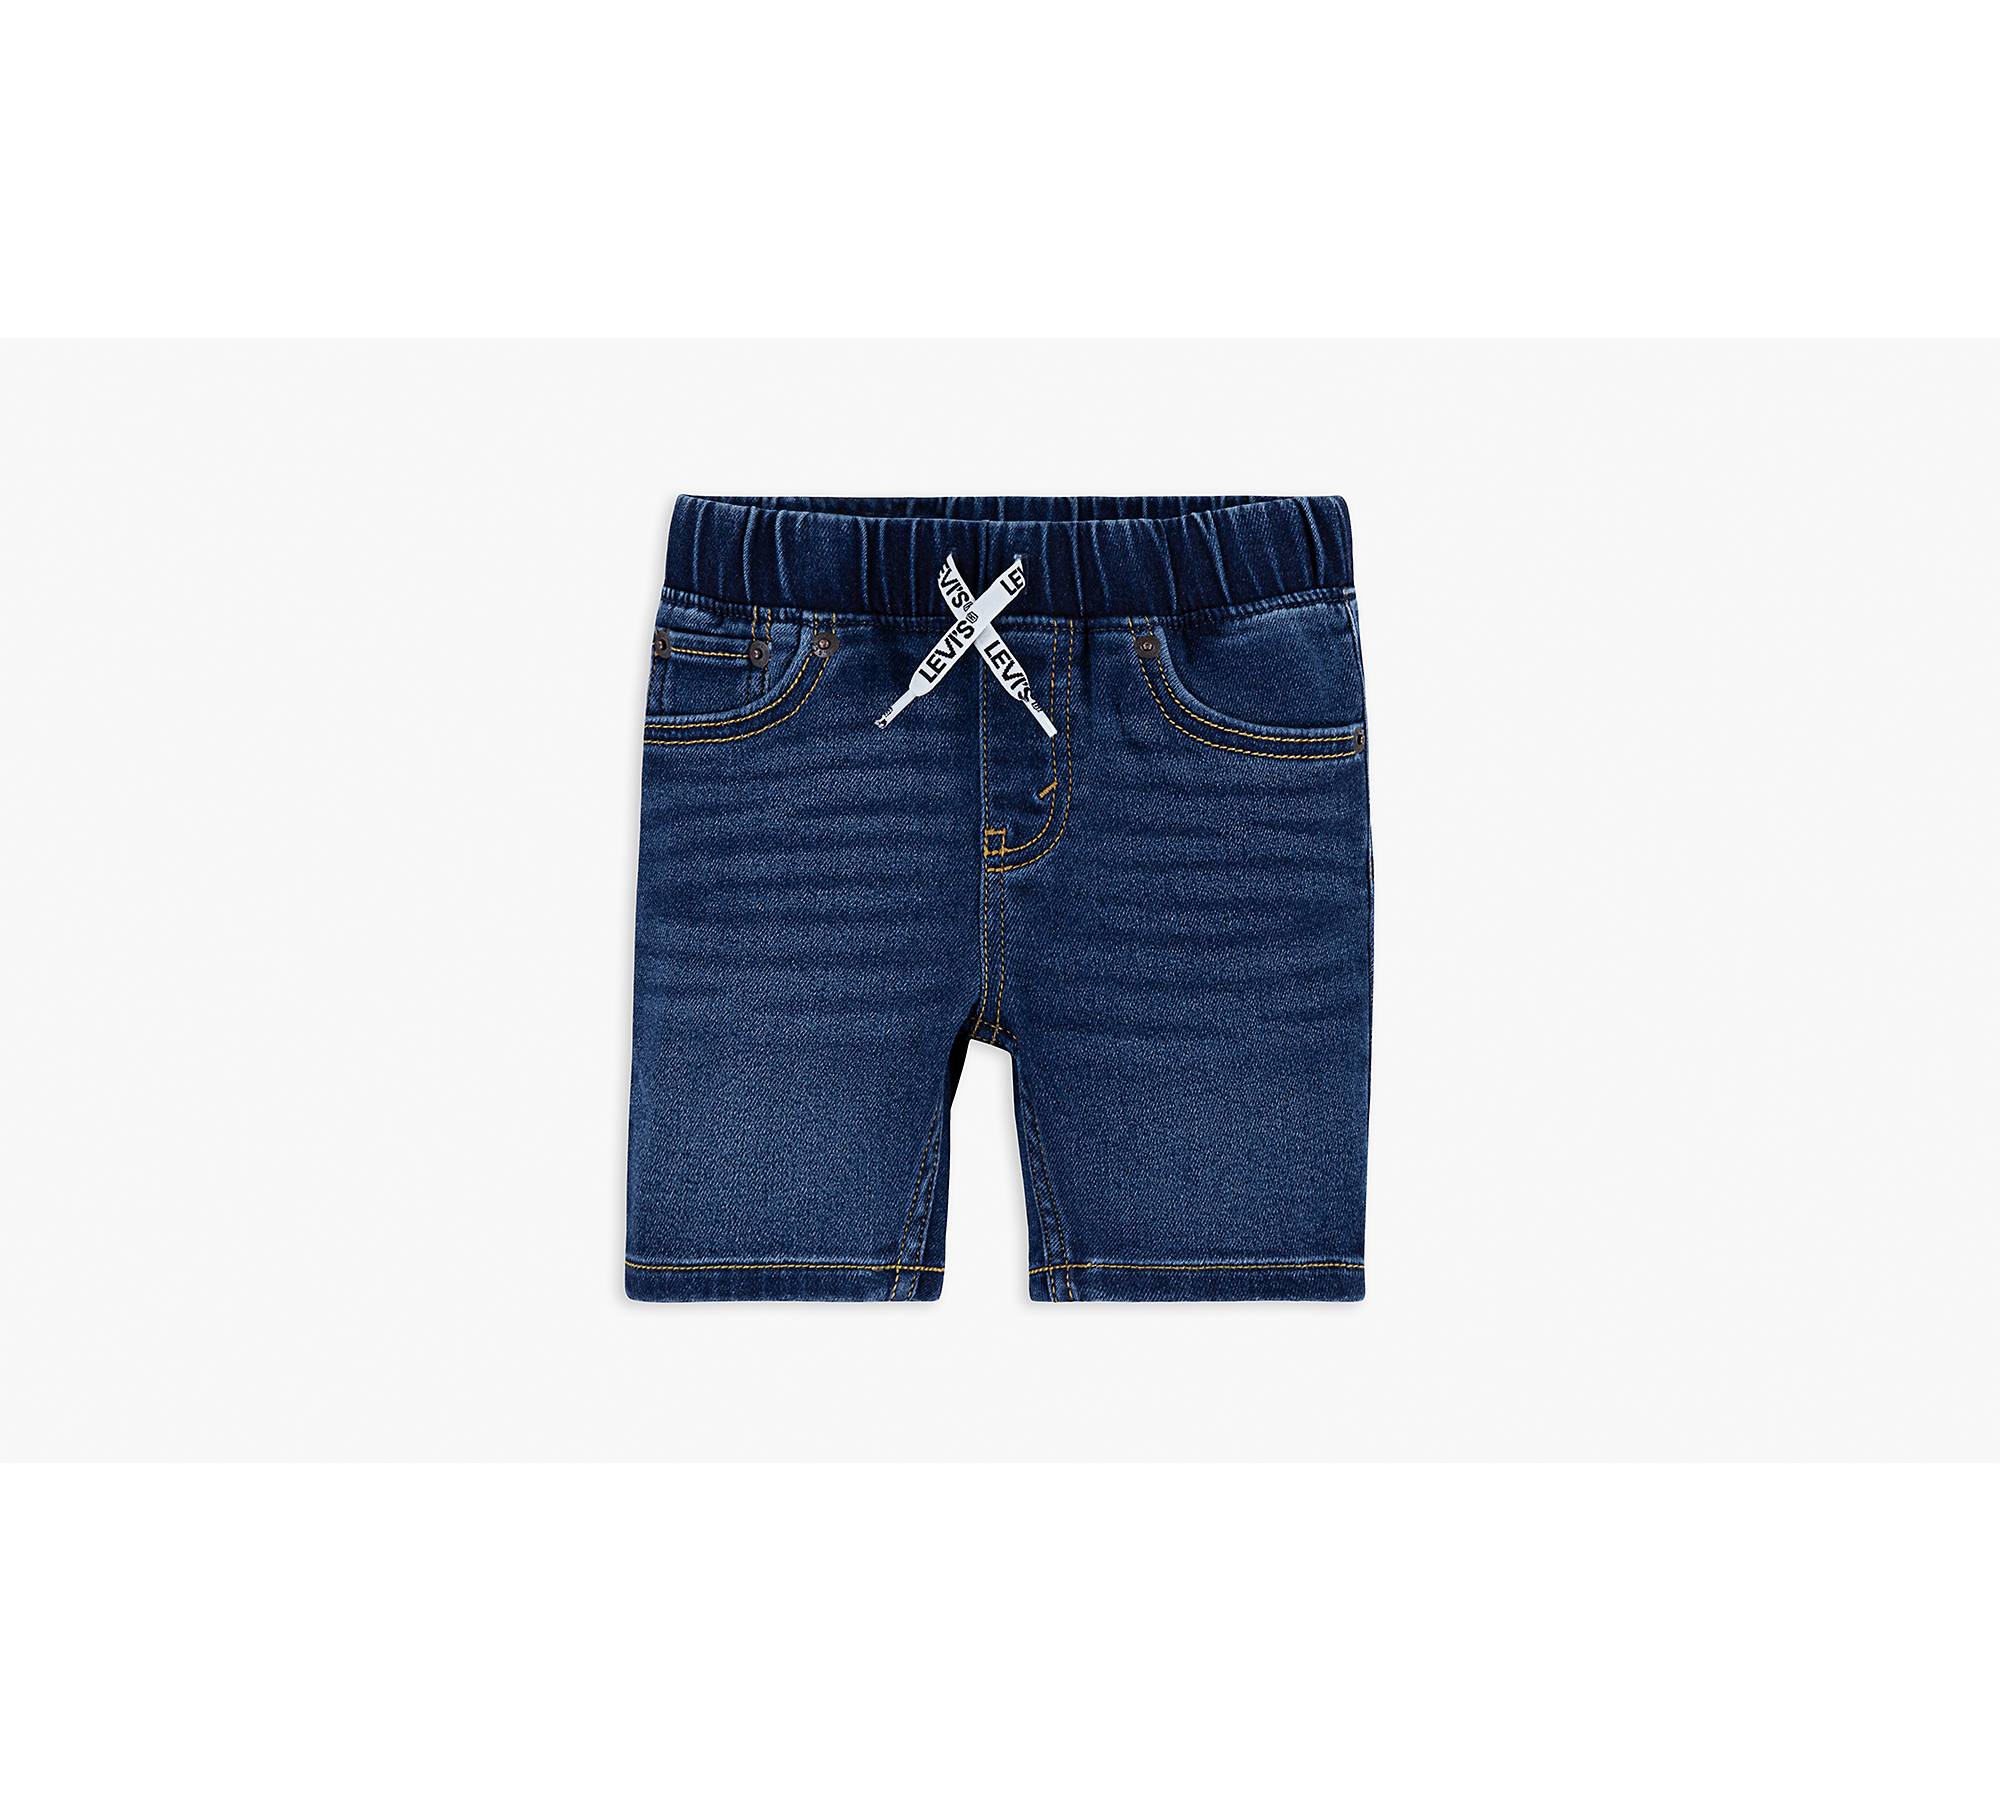 Skinny Fit Pull On Shorts Toddler Boys 2T-4T 1